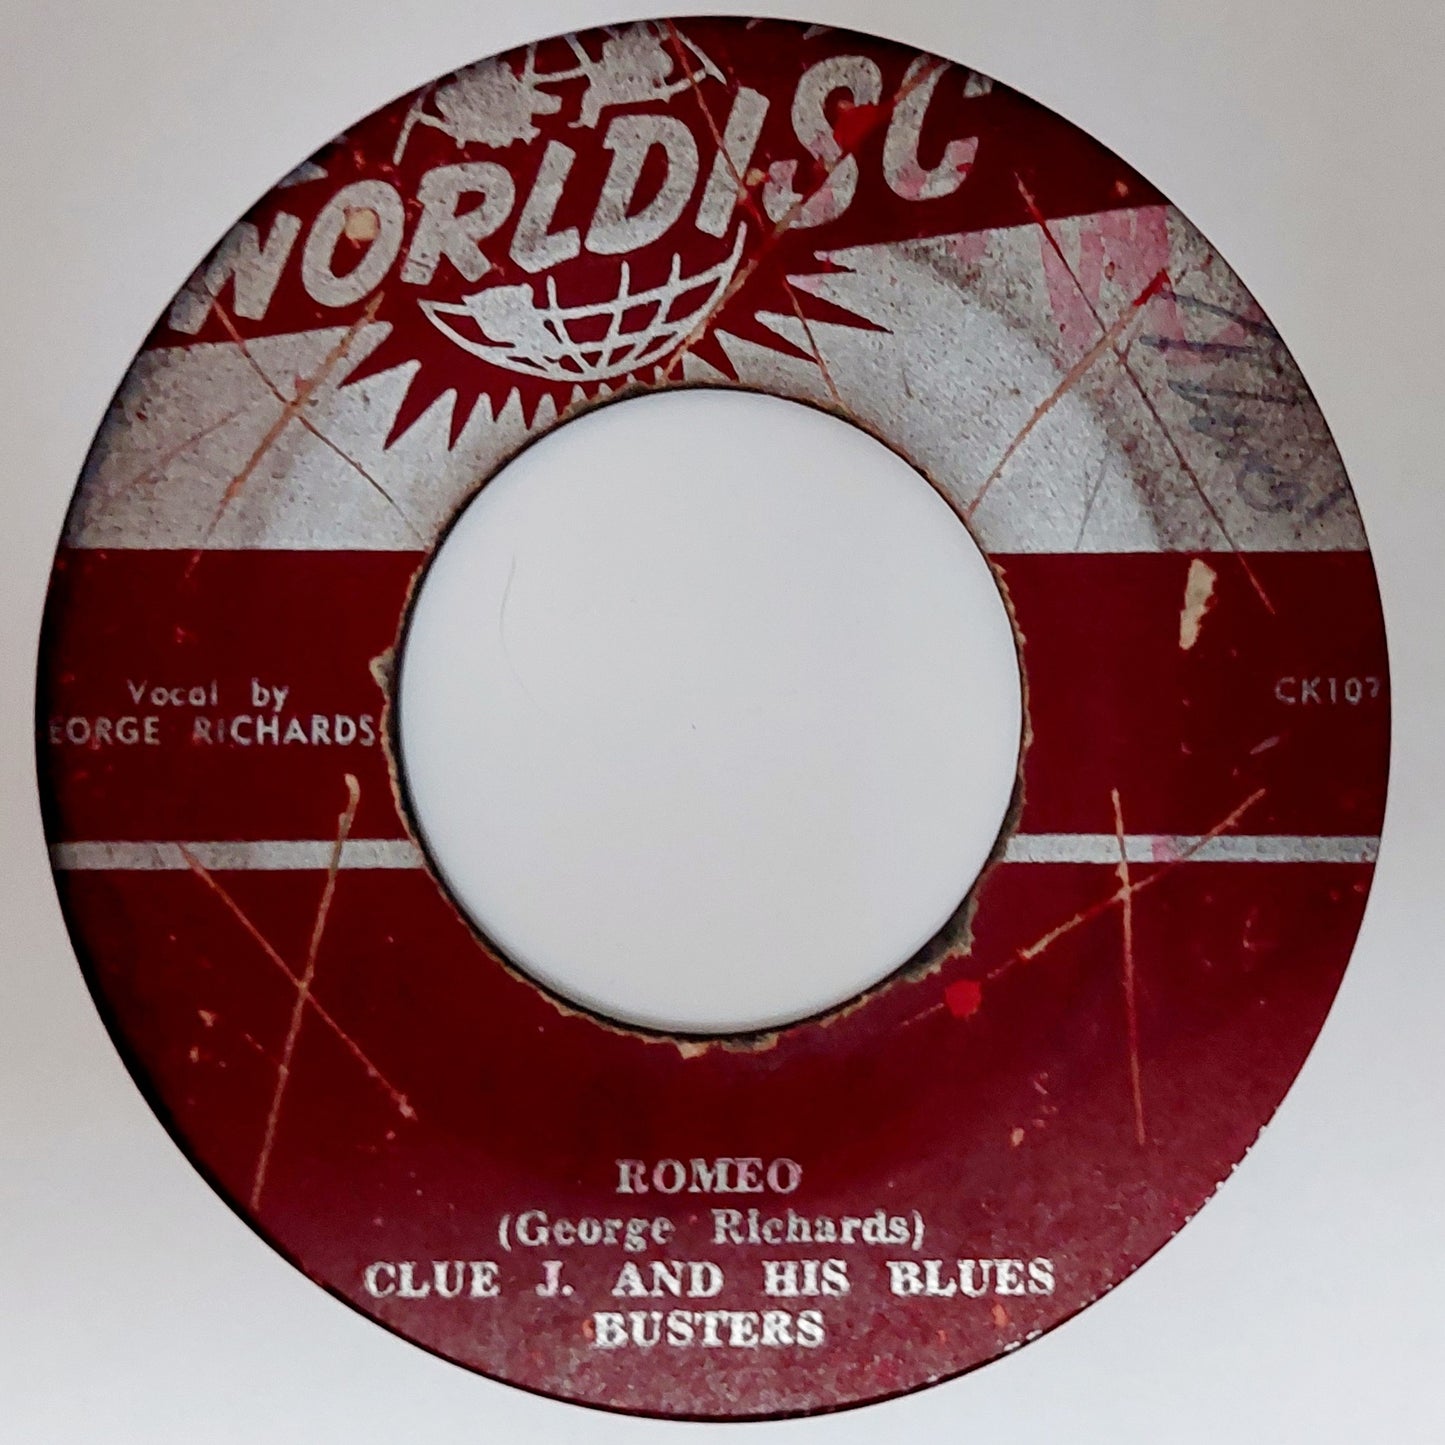 Clue J. And His Blues Blasters - Blue Blasters Shuffle